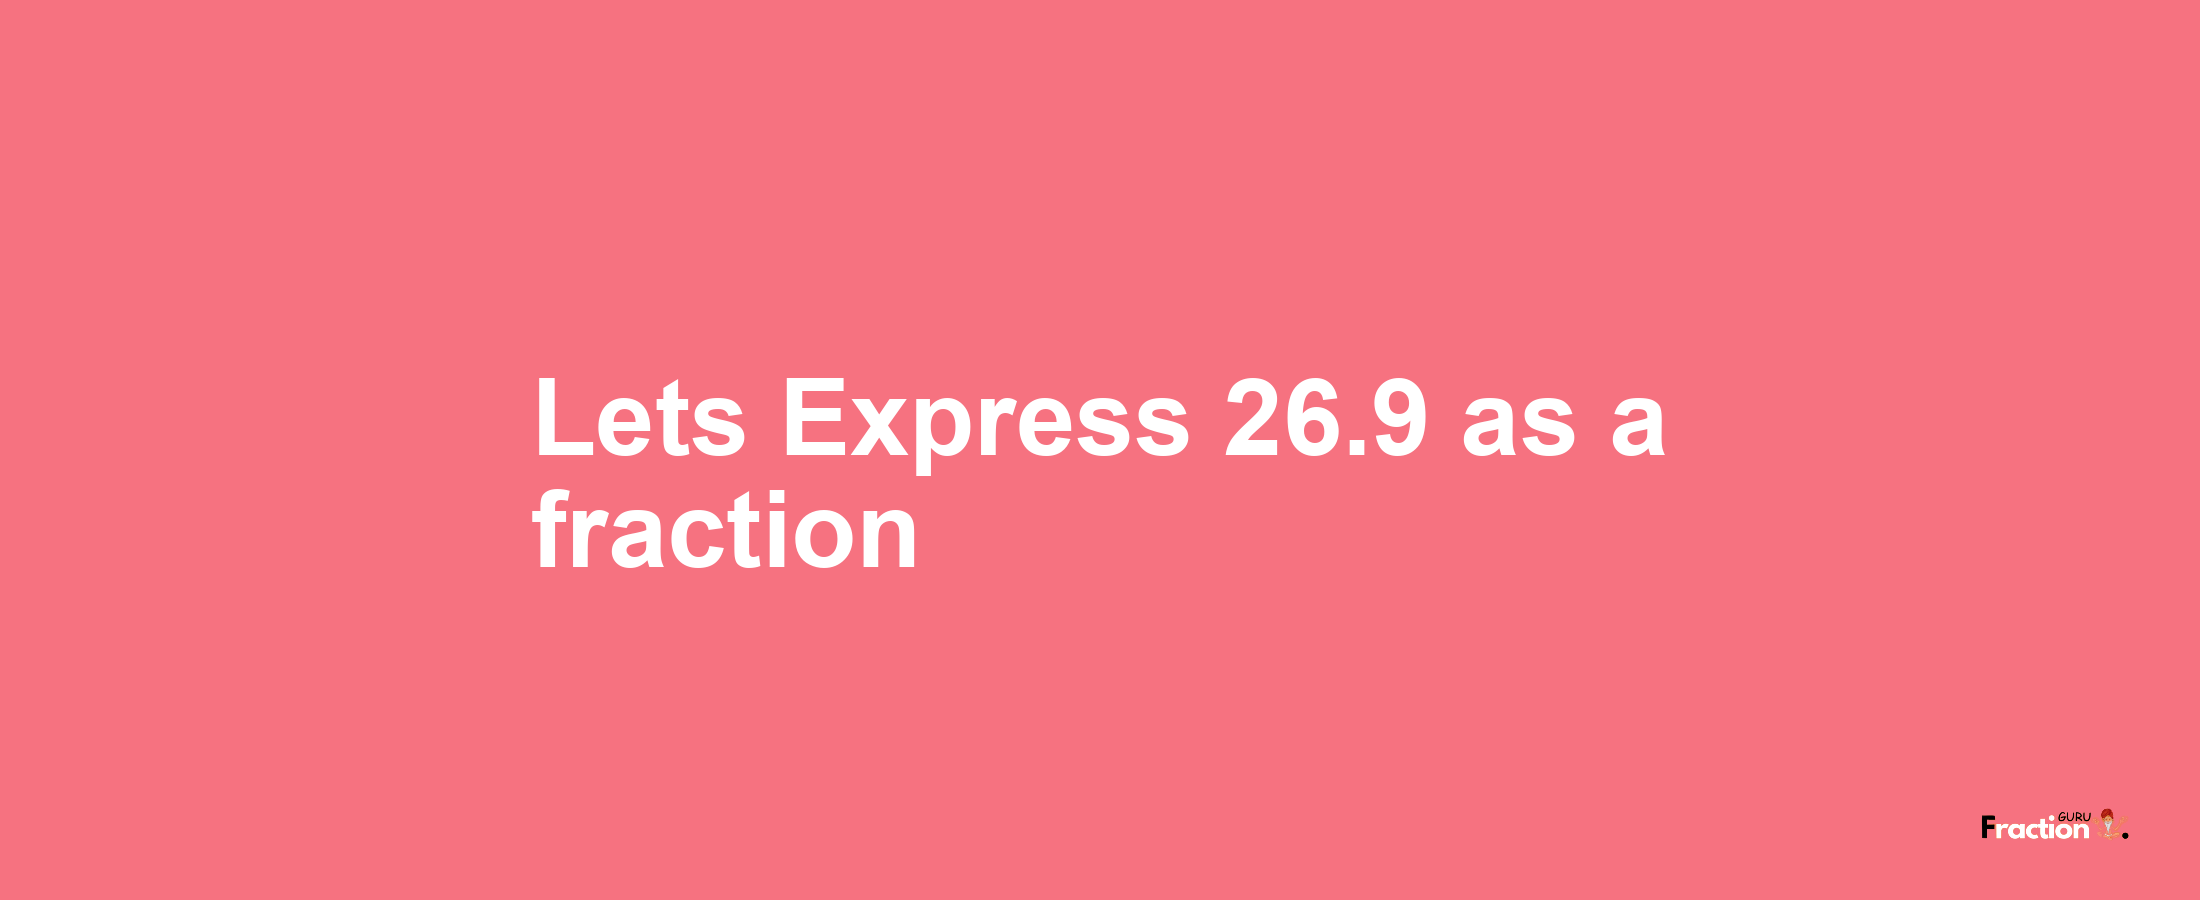 Lets Express 26.9 as afraction